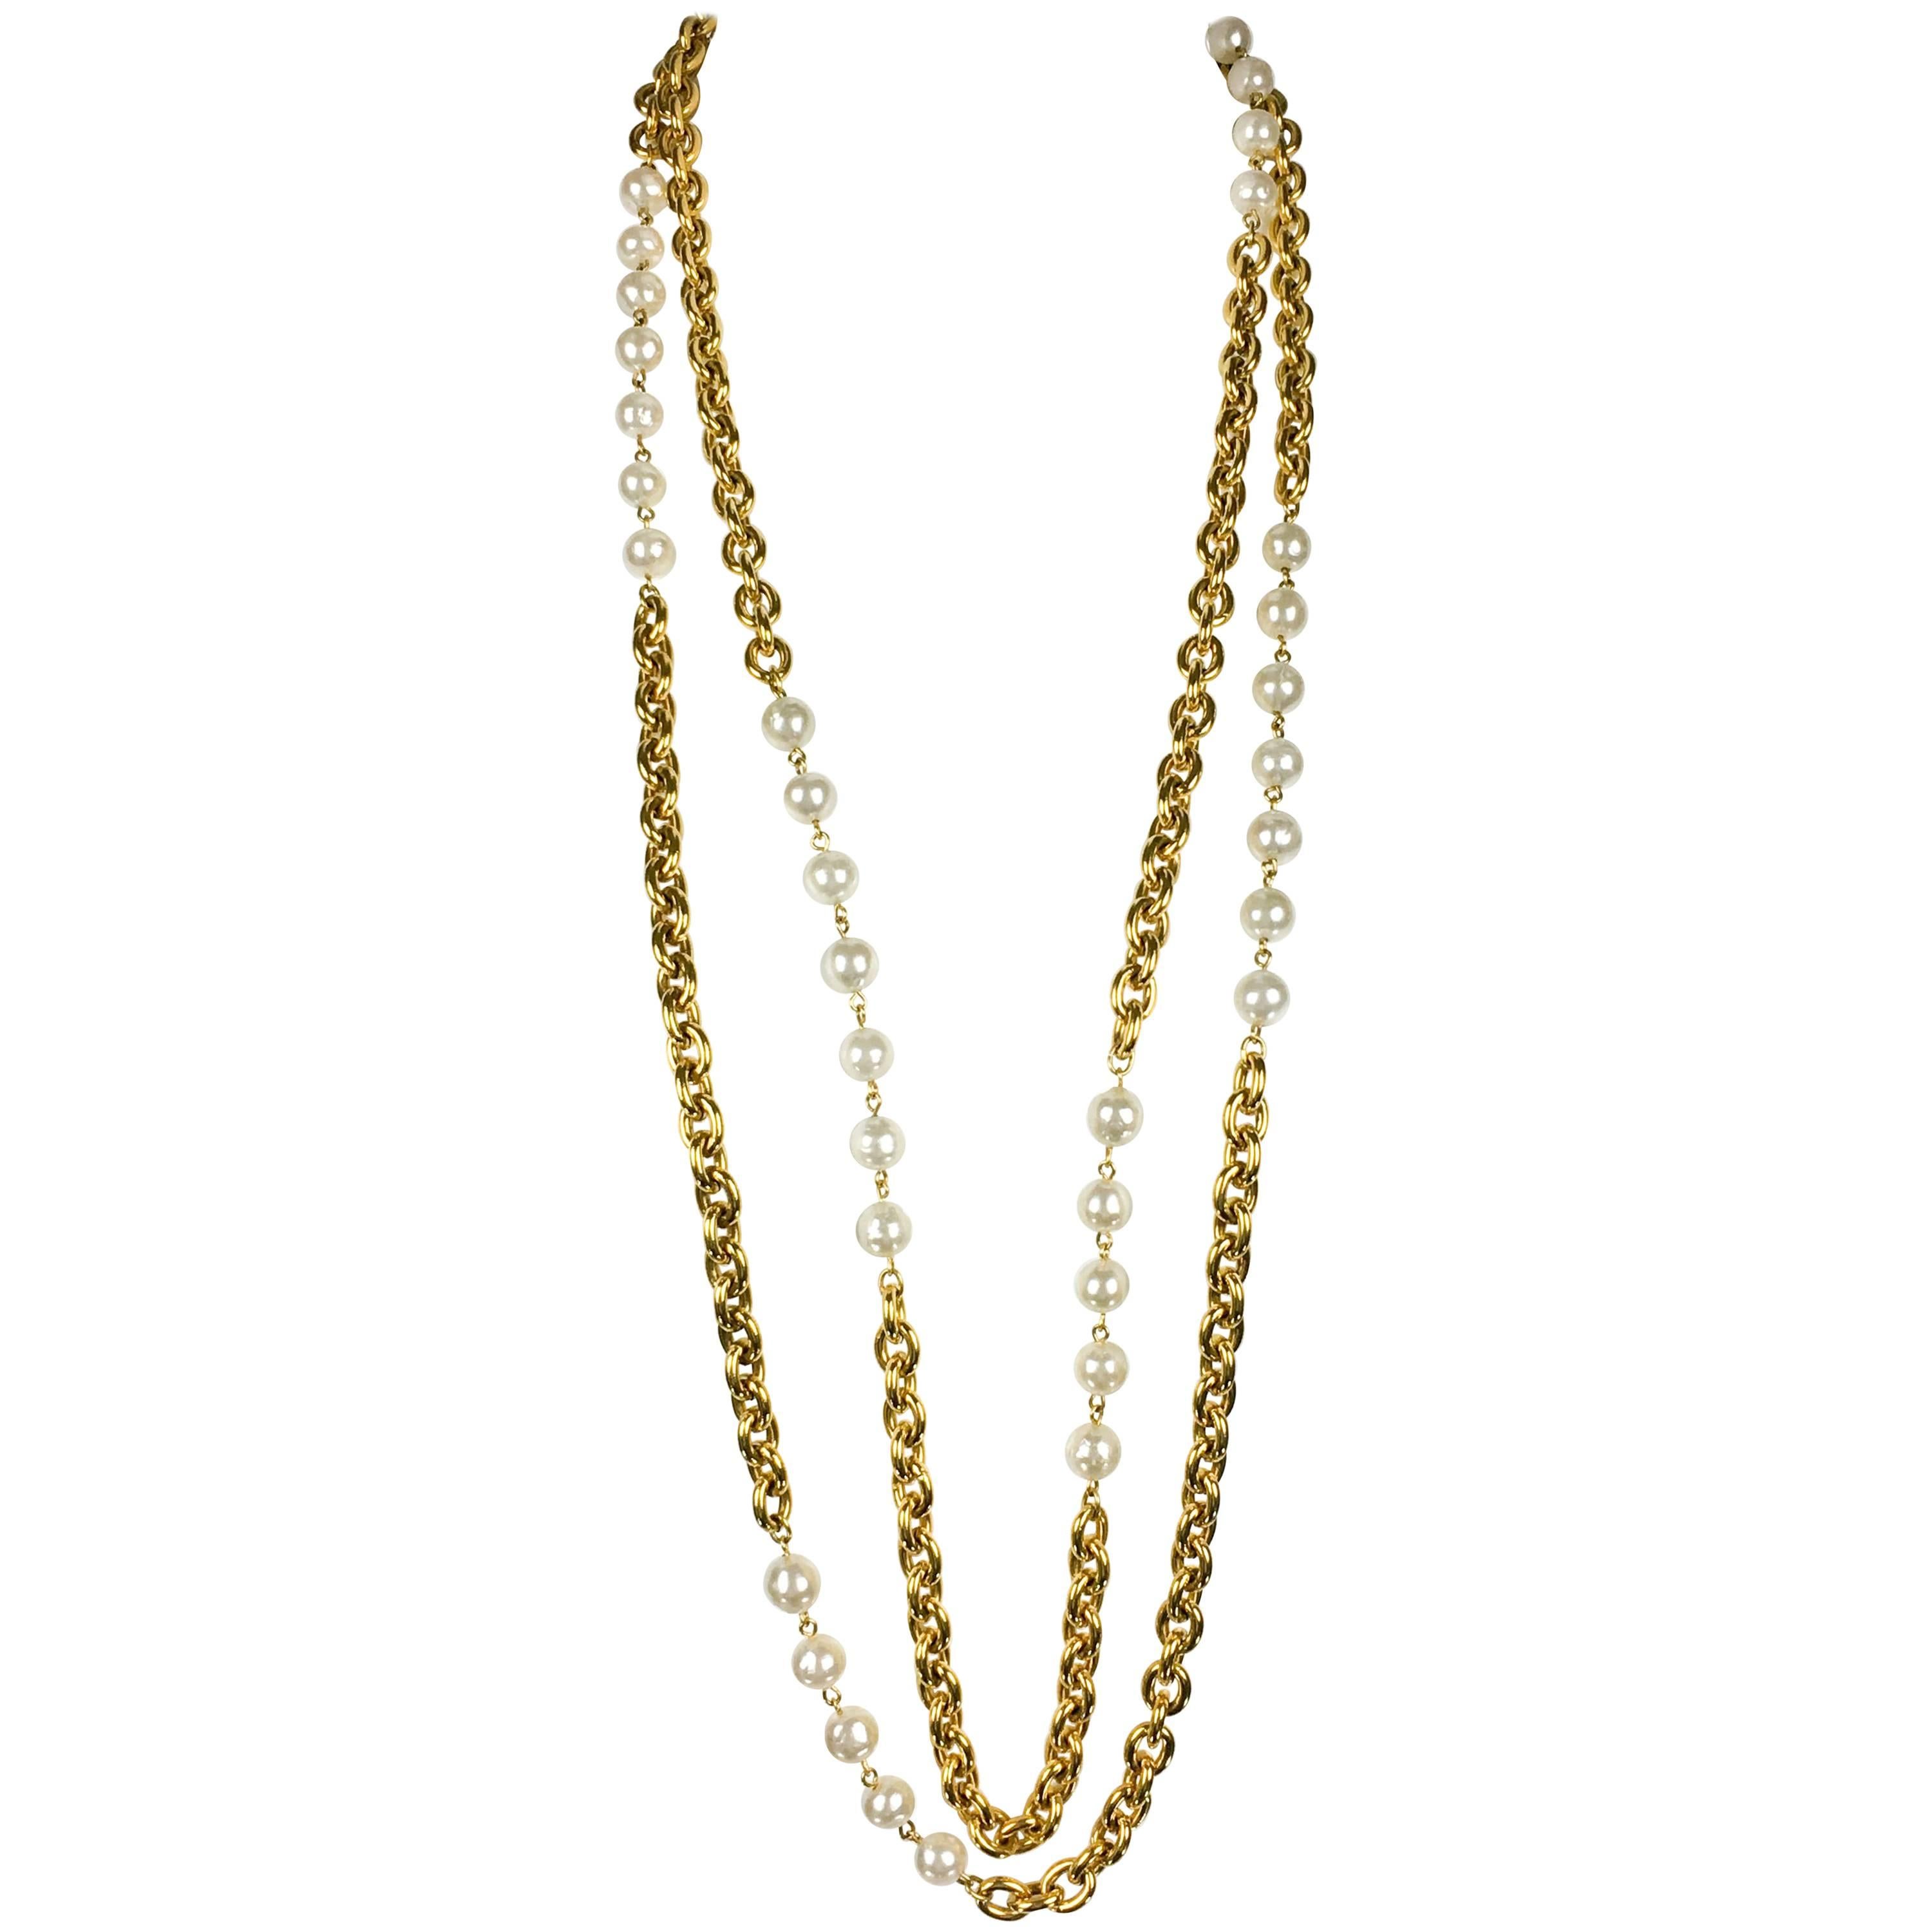 Chanel Double-Strand Gilt Chain and Pearl Sautoir Necklace, 1984 